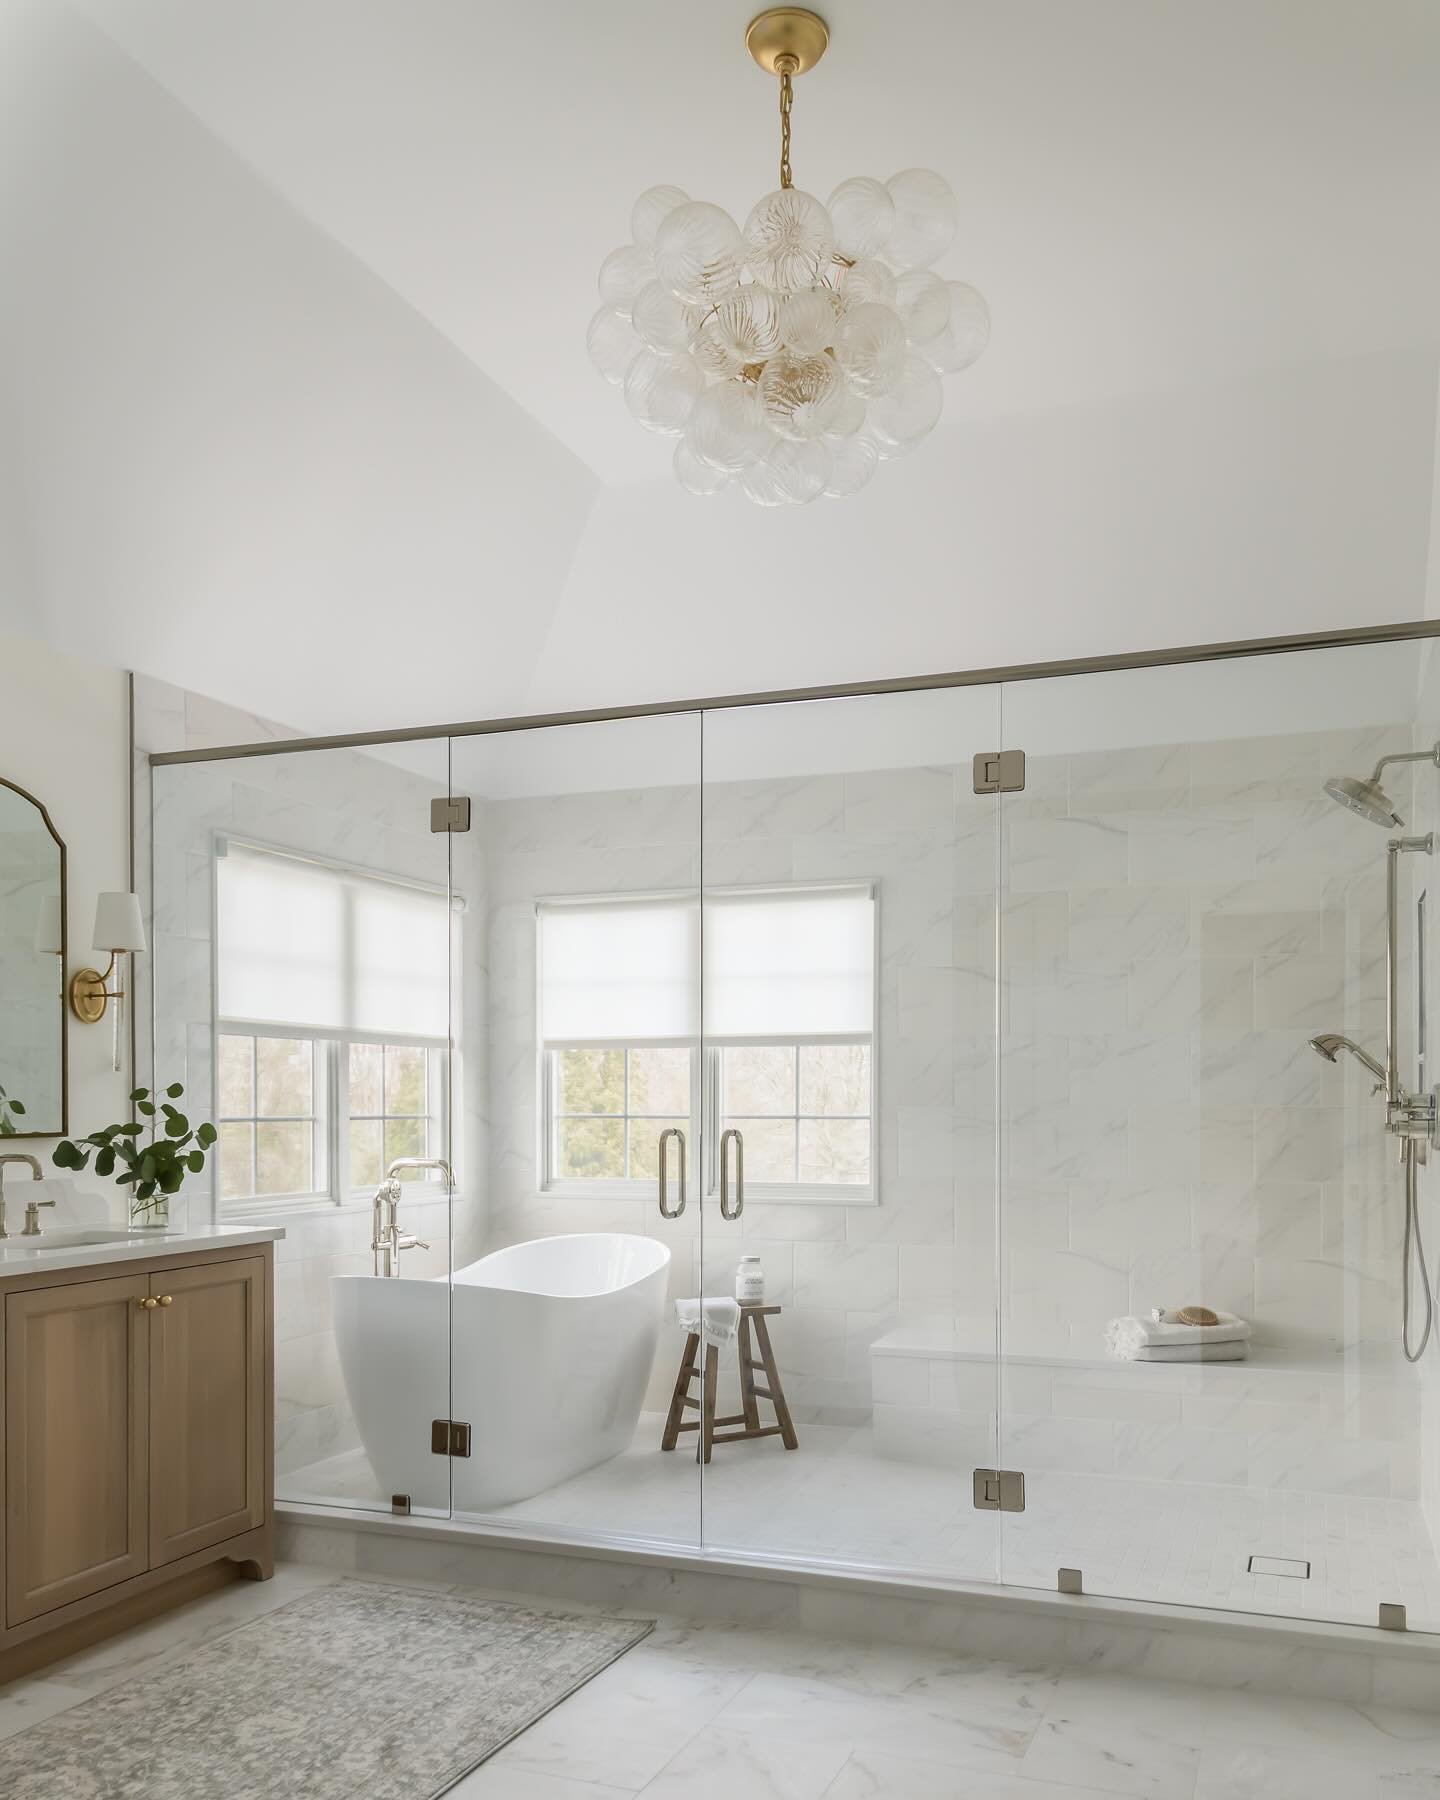 This is your sign to turn your 90&rsquo;s corner jacuzzi tub into a spa-like wet room ✨Swipe through for the outdated before of this gorgeous bathroom renovation #southmaindesign 
.
.
Design @southmaindesign 
Photography @meghanbalcomphotography 
Con